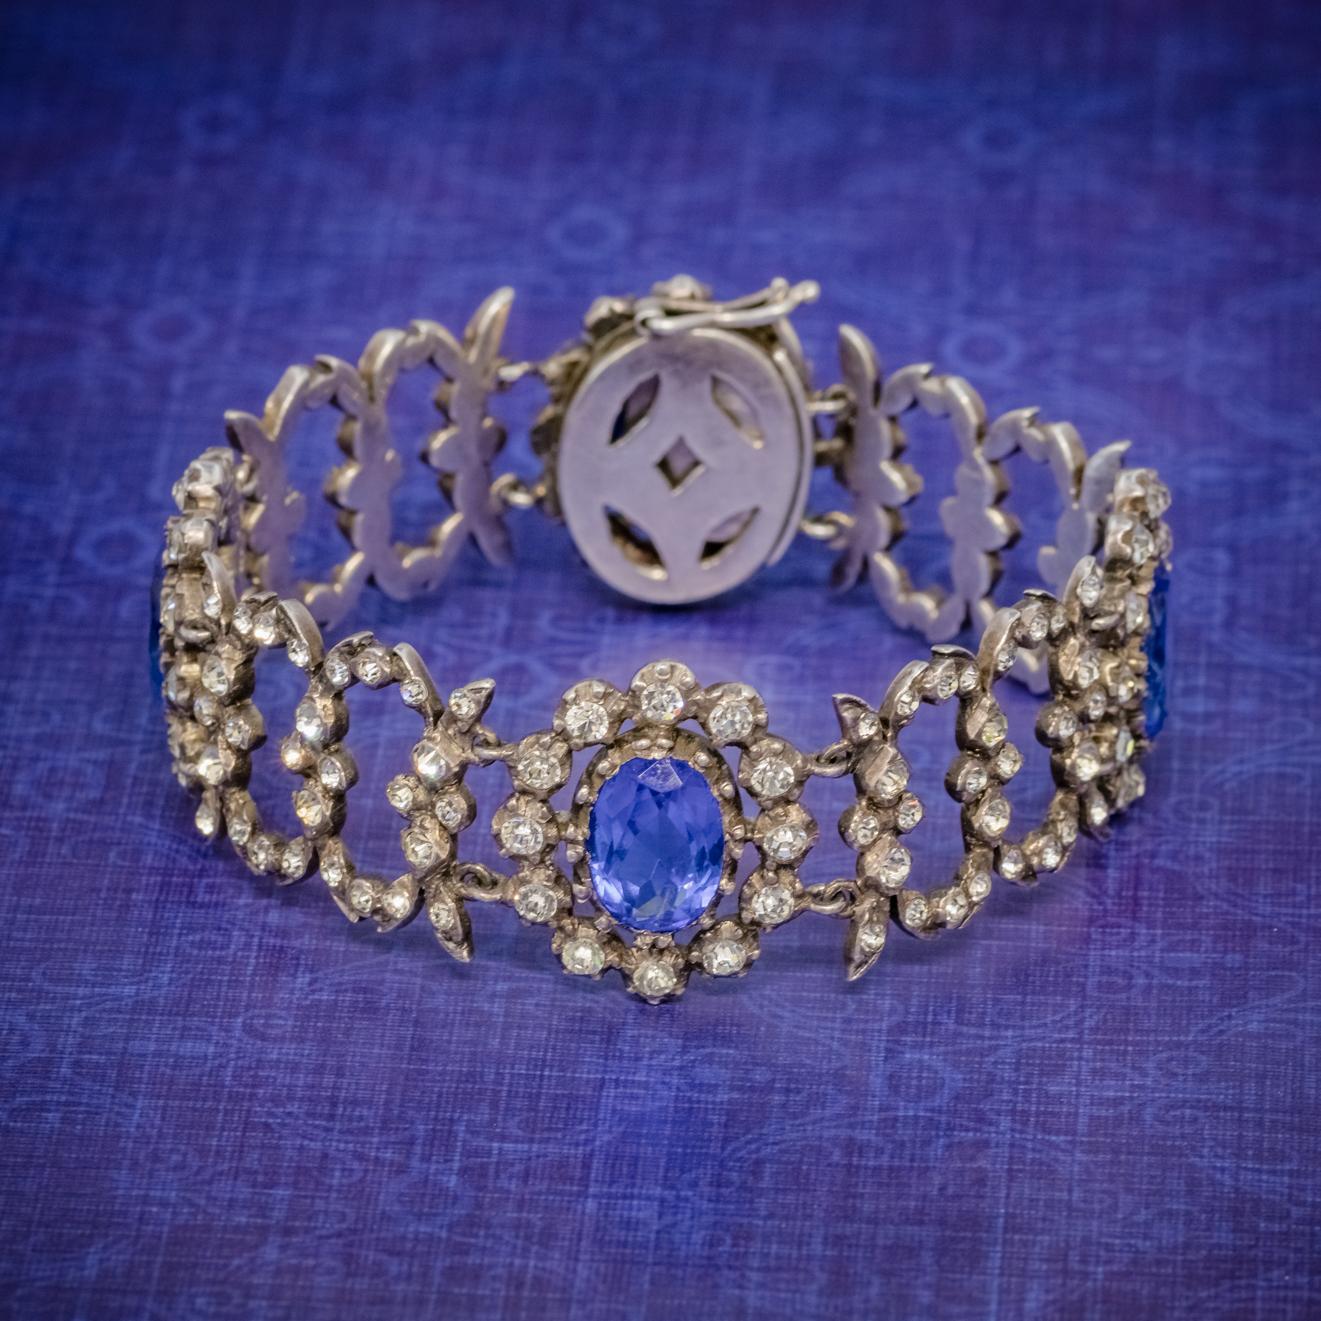 An exquisite Antique Georgian bracelet made up of ornate, solid Silver links decorated with four large blue Paste Stones and an array of glistening white Pastes.

Paste is a transparent flint glass that simulates the fire and brilliance of